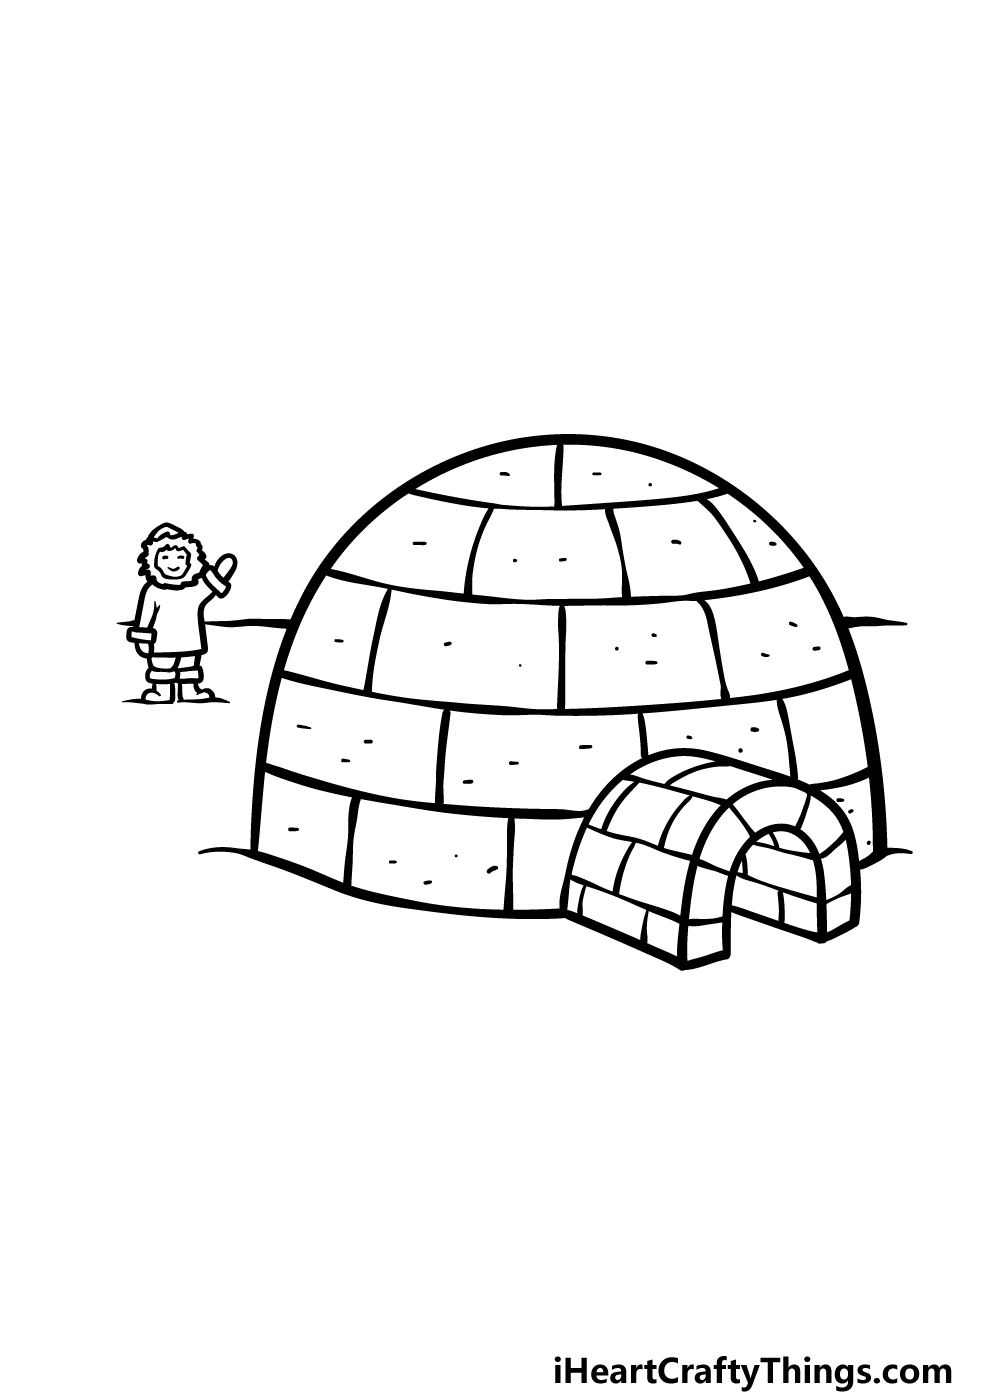 Igloo ice house dome arctic building drawing Vector Image